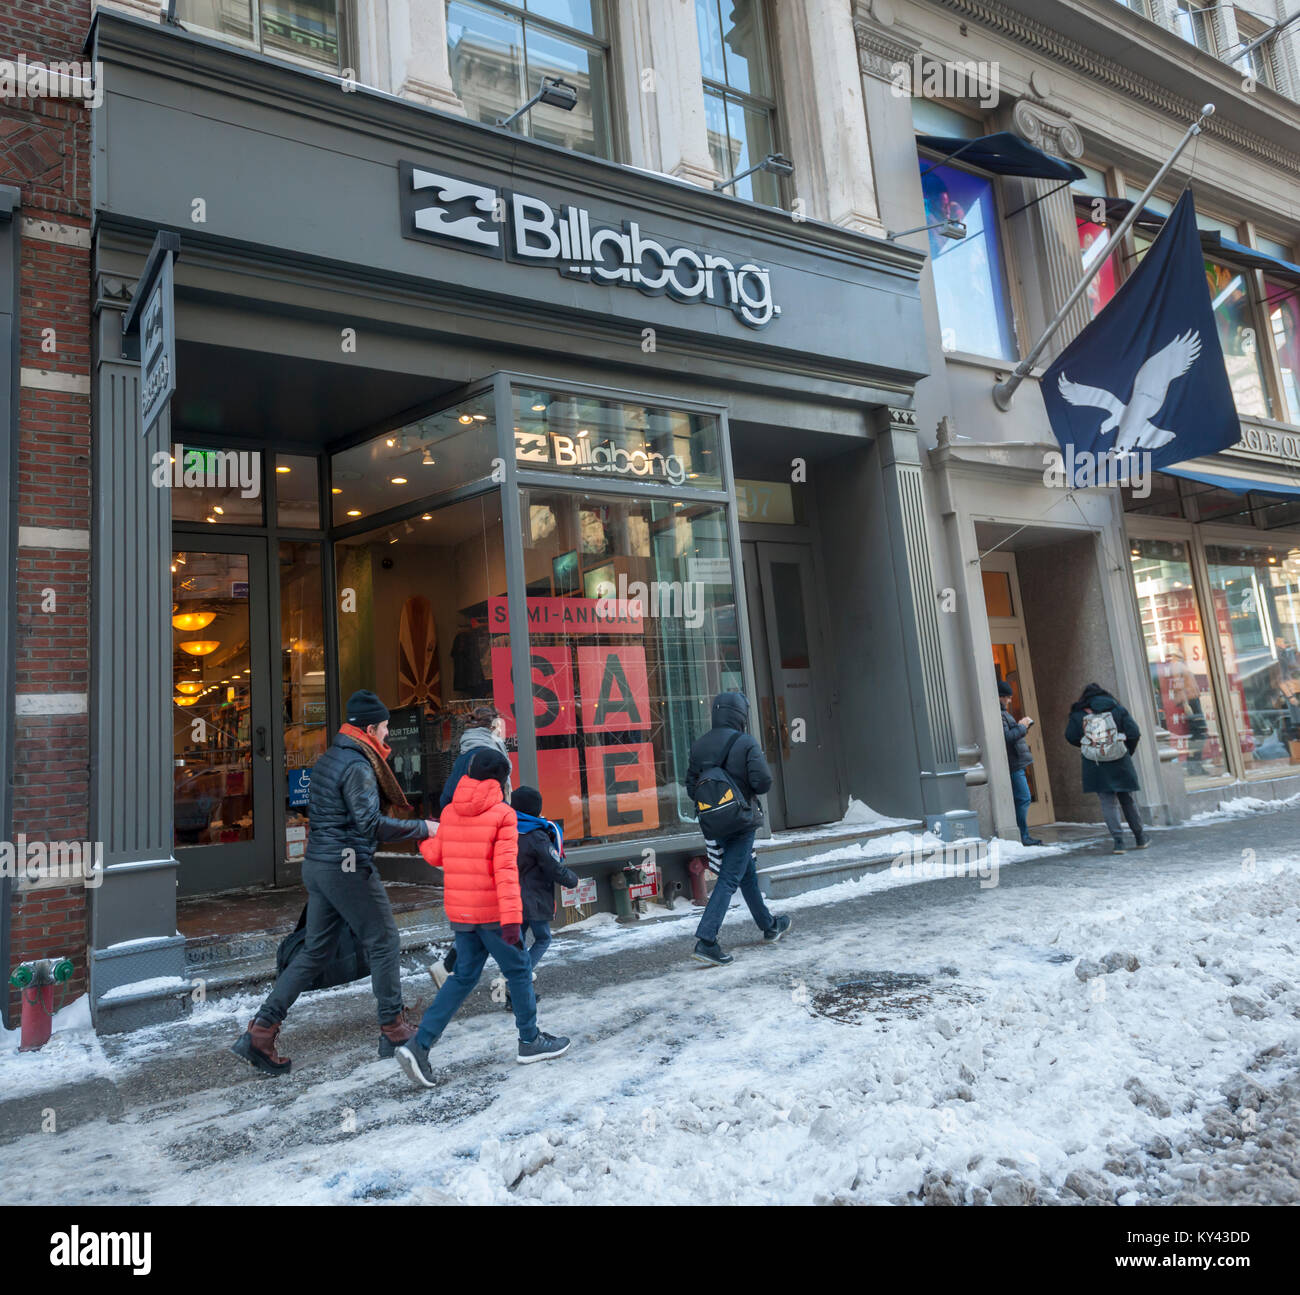 The Billabong store in Soho in New York on Friday, January 5, 2018. Oaktree  Capital Management, the owner of surfer brand Quicksilver, is buying  Australian-based Billabong in a deal worth $155 million.